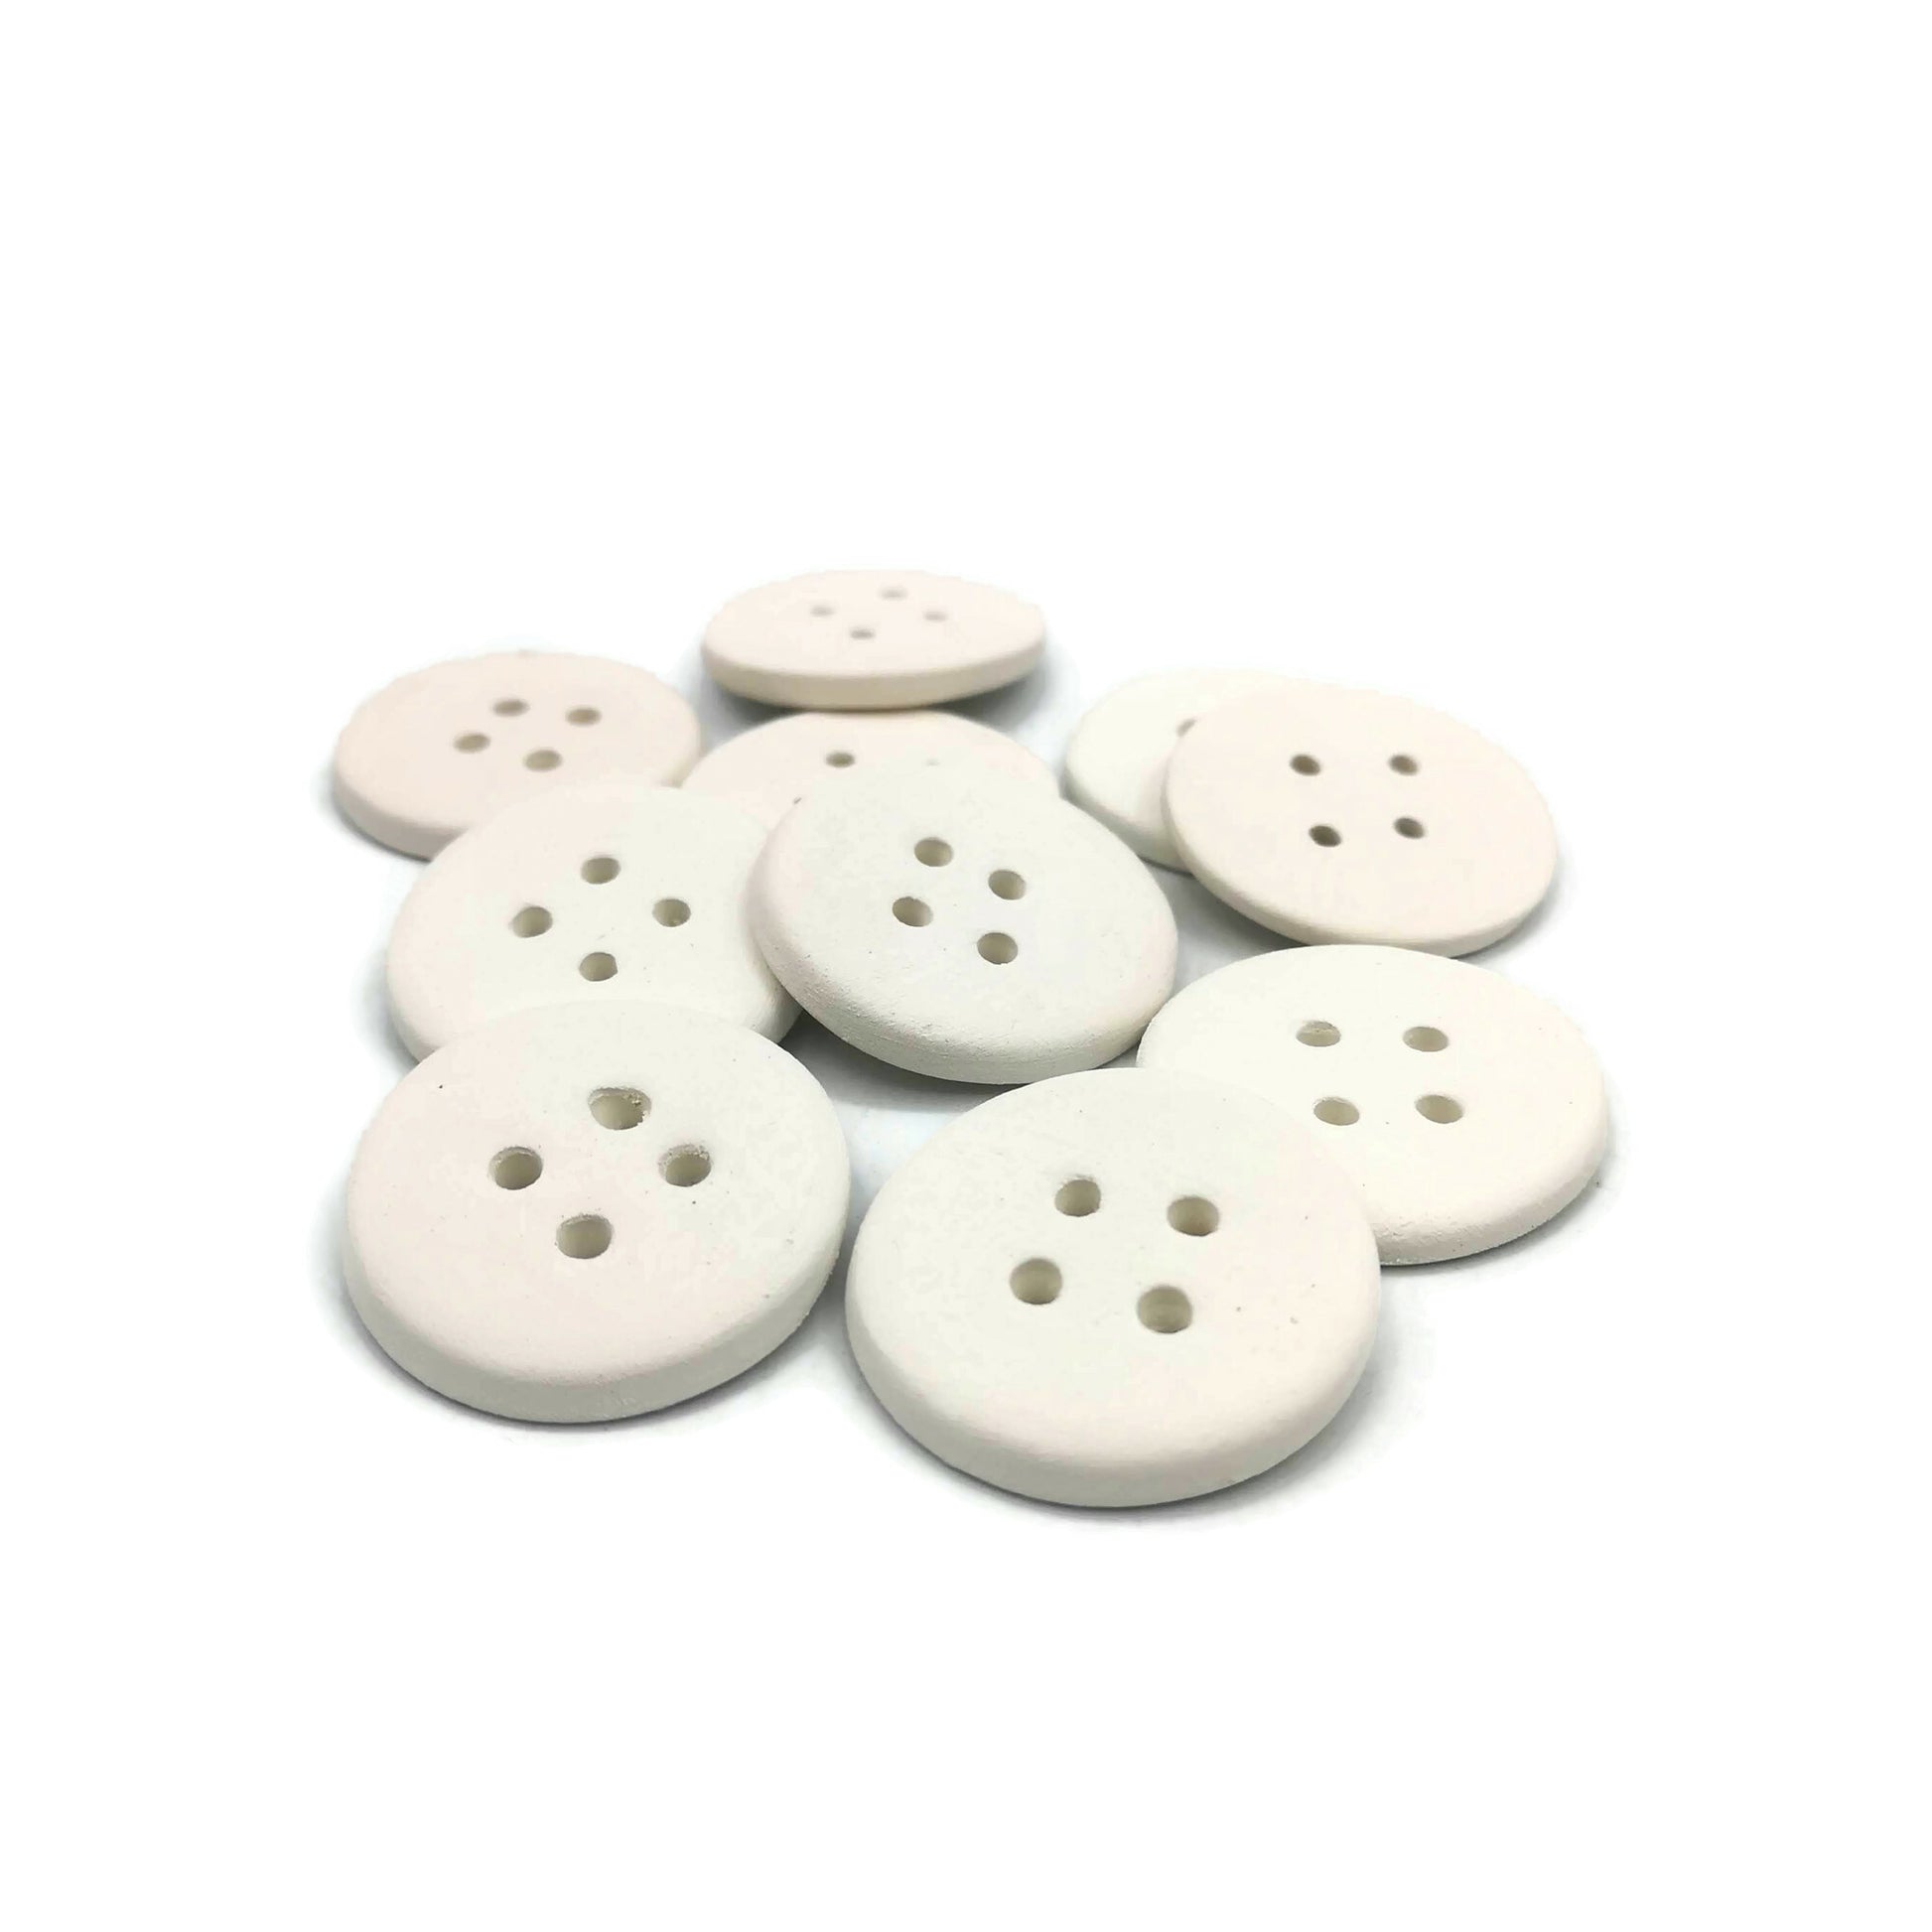 Handmade ceramic Sewing buttons Set, Unpainted Ceramic Bisque ready To Paint, Upholstery Buttons Round Shape, Best Gifts For Her Large Blank - Ceramica Ana Rafael